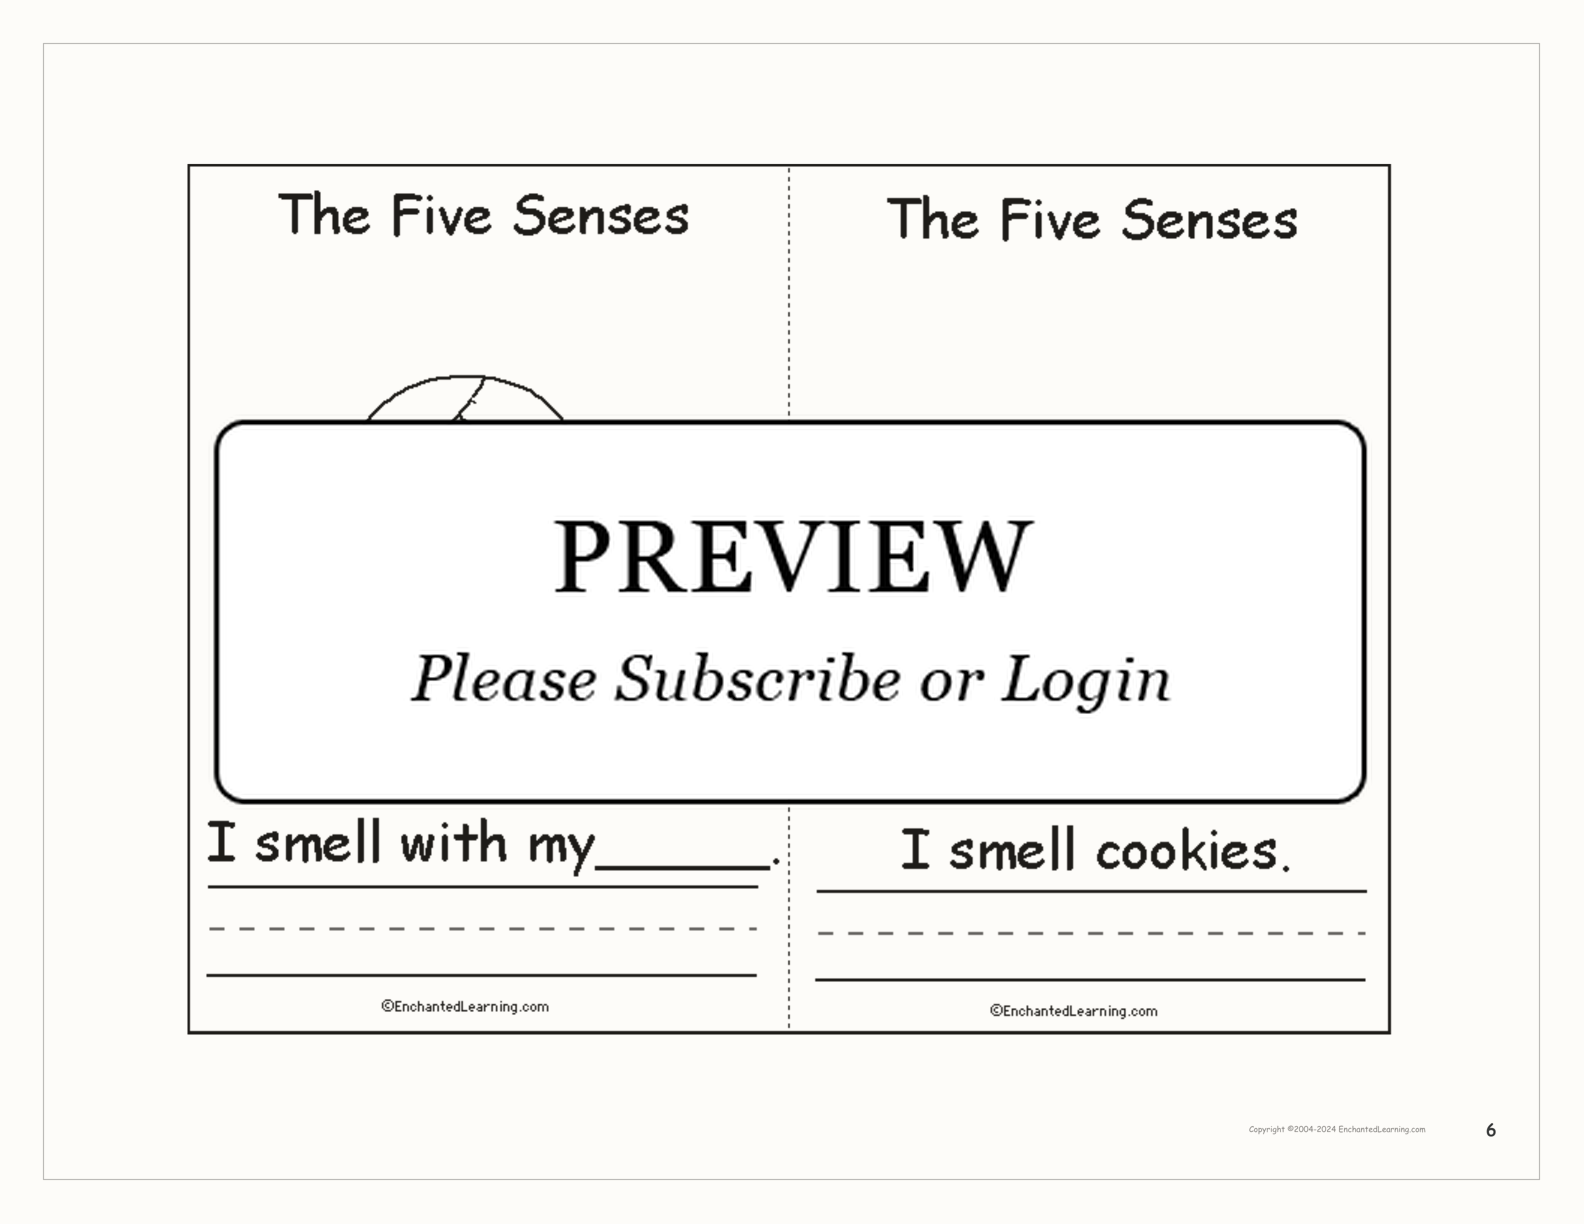 The Five Senses - Printable Book interactive worksheet page 6